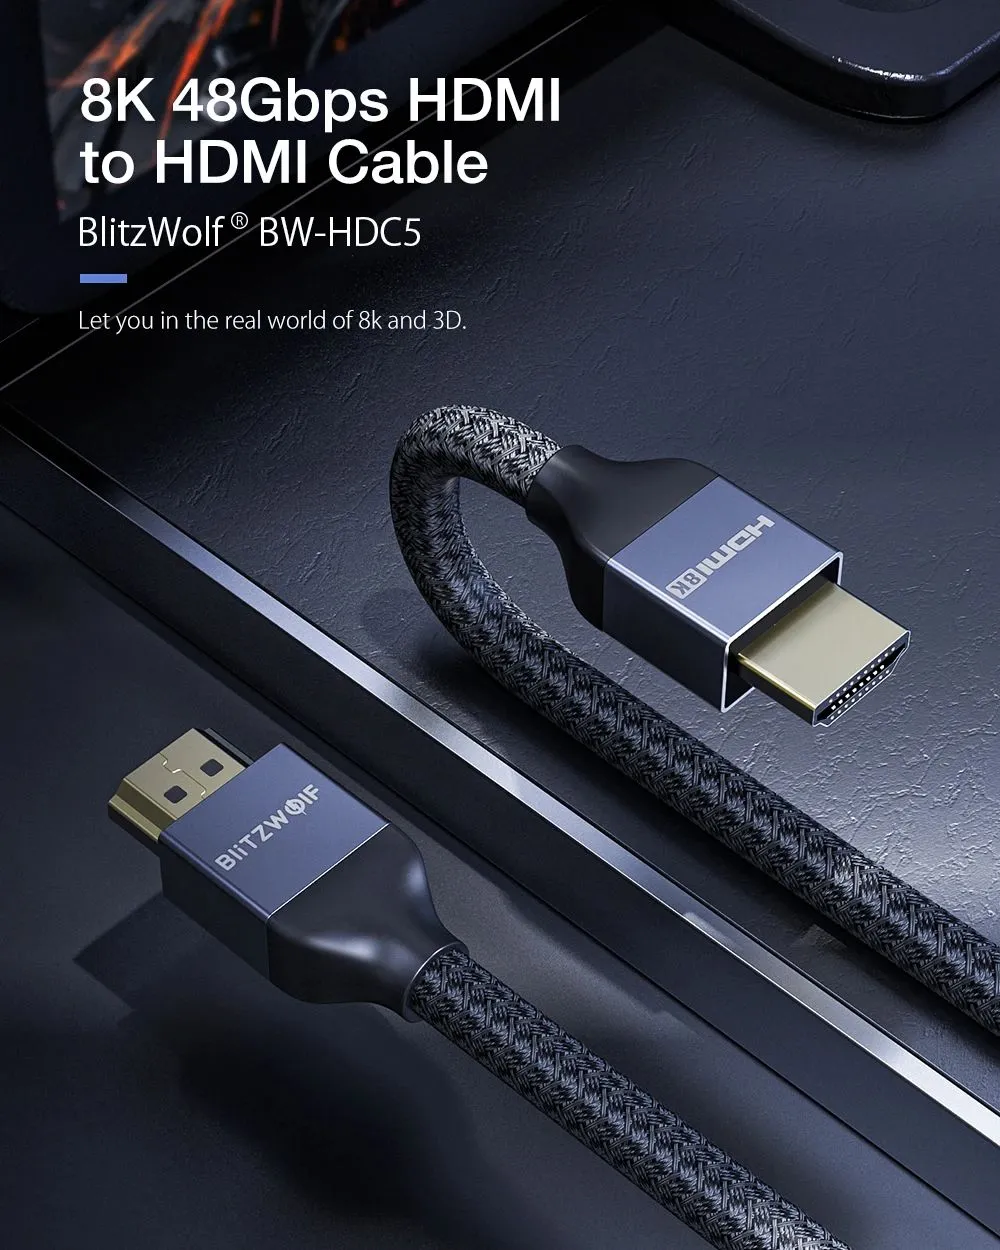 Blitzwolf Bw Hdc5 8k 48gbps Hdmi To Hdmi Cable (2)